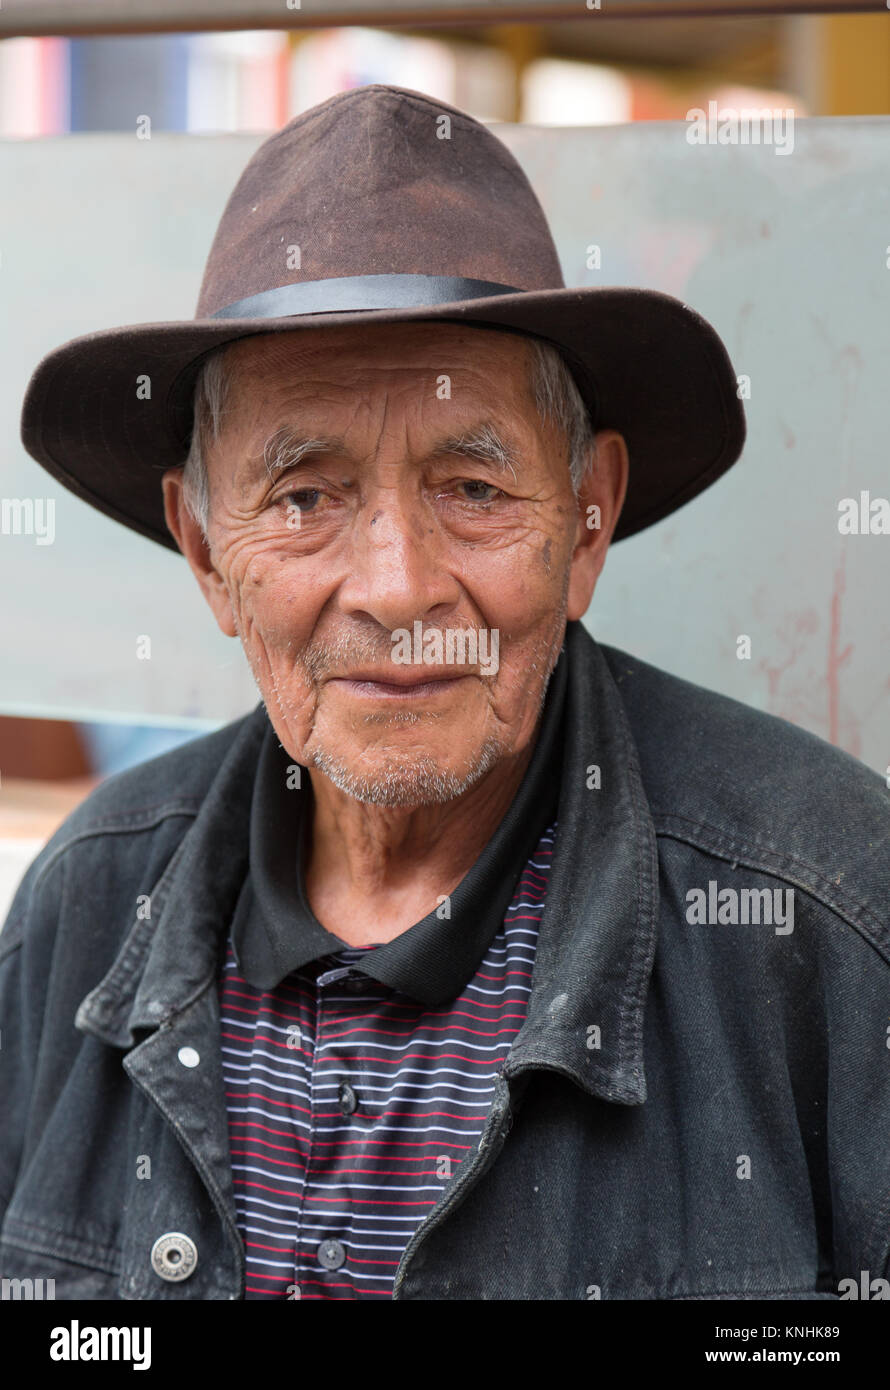 Portrait of a mature South American man aged 60s, Gualacea, Ecuador South America Stock Photo